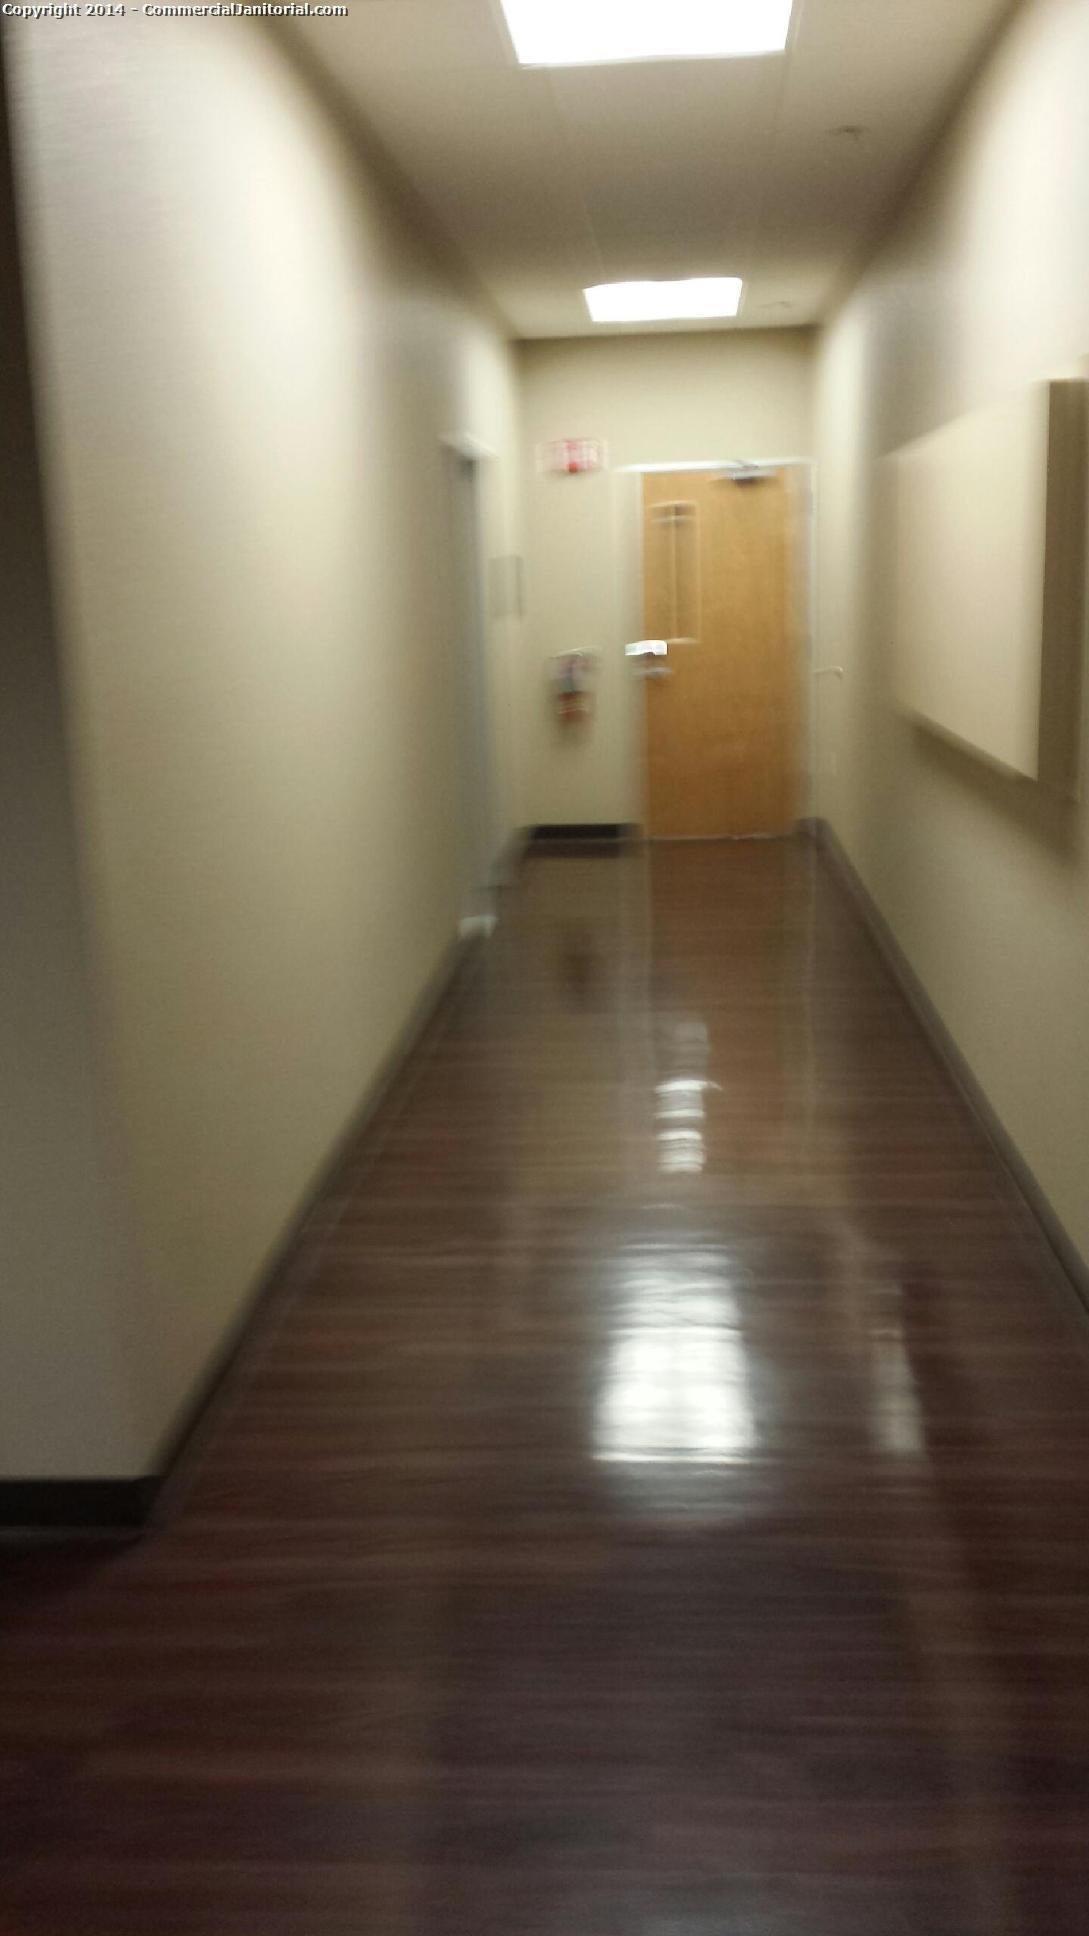 Hallways were swept and mopped to meet clients expectations 